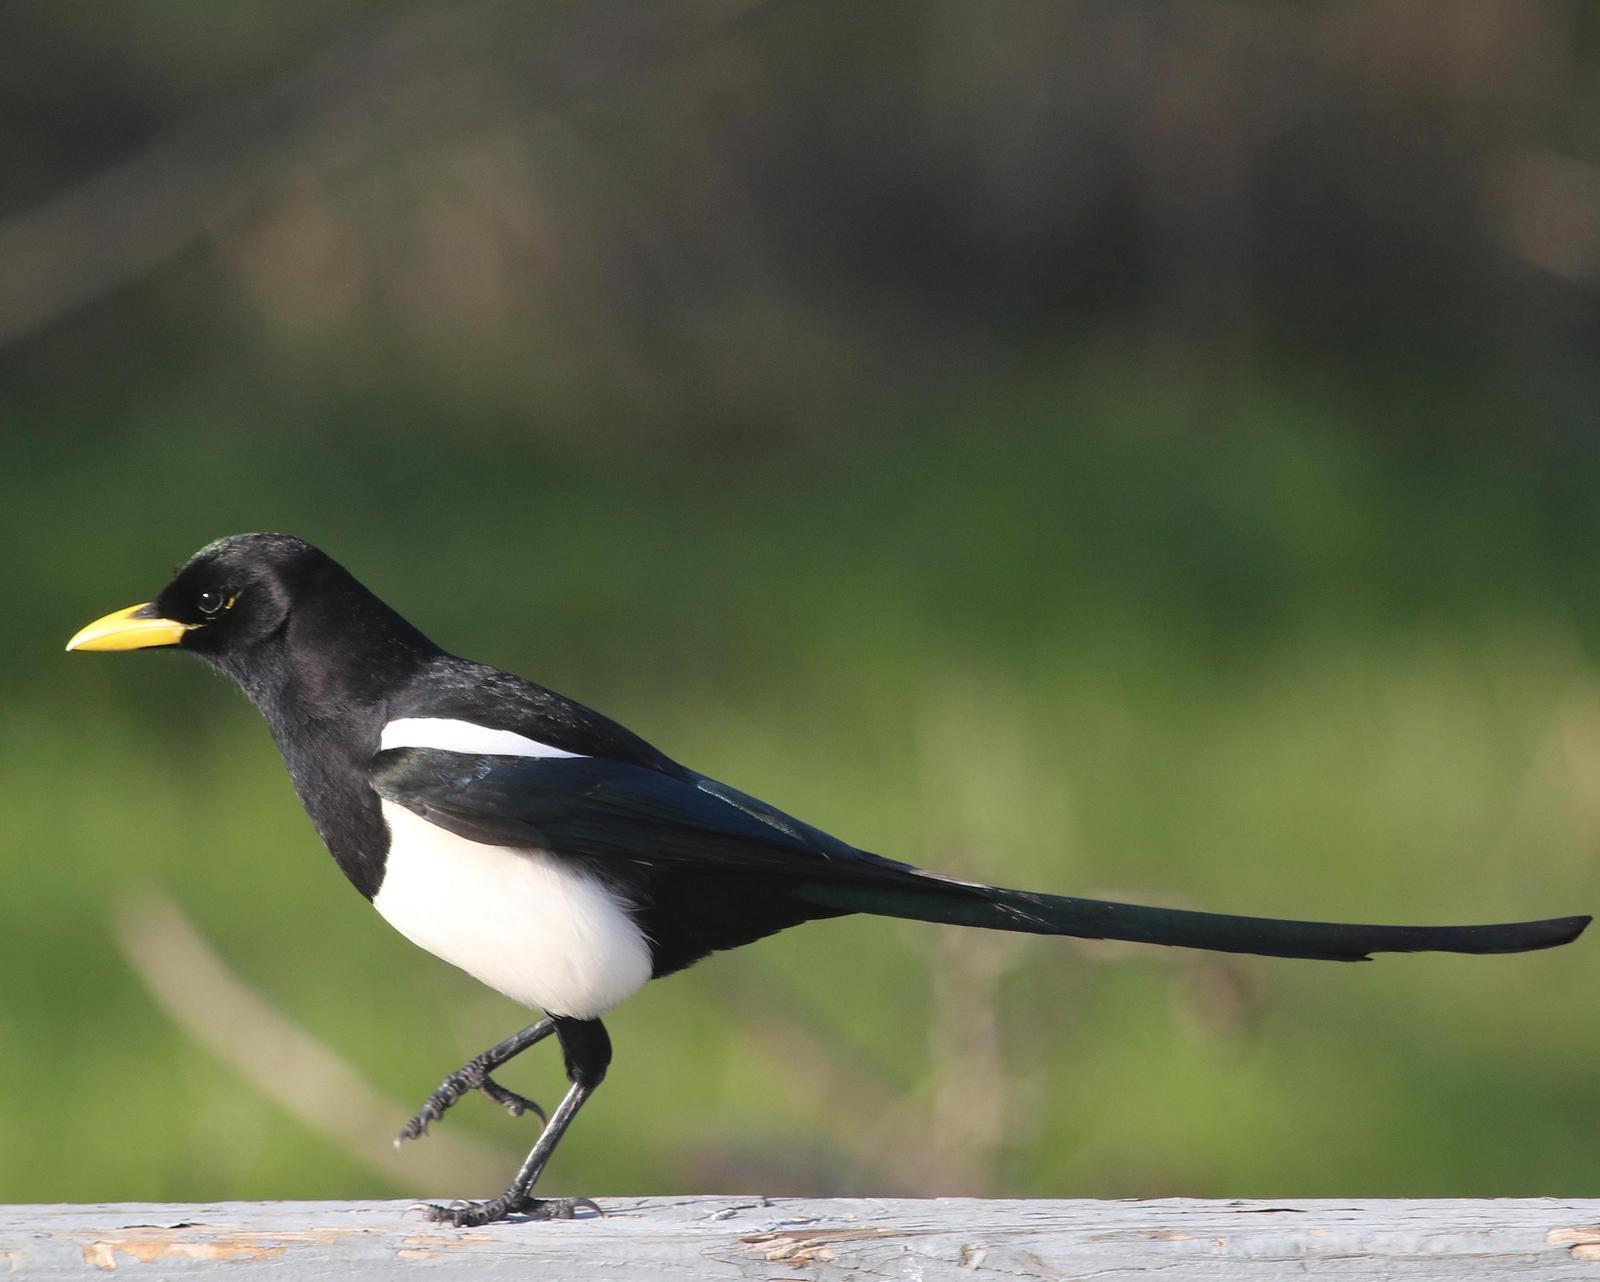 Yellow-billed Magpie Photo by Isaac Sanchez